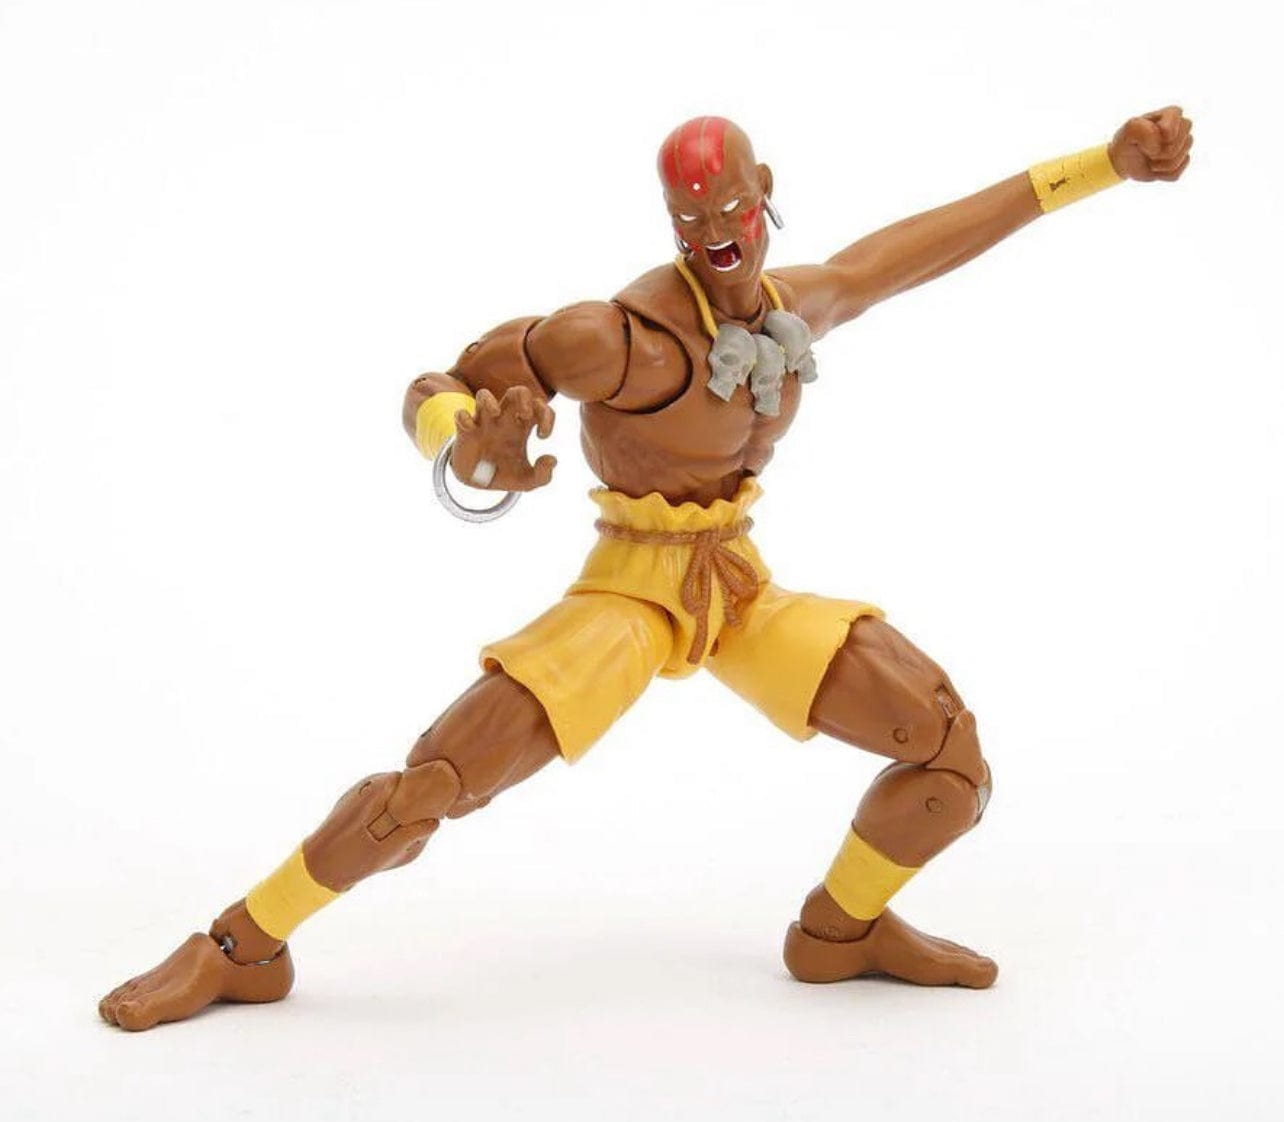 Ultra Street Fighter II: The Final Challengers Action Figure 1/12 Dhalsim